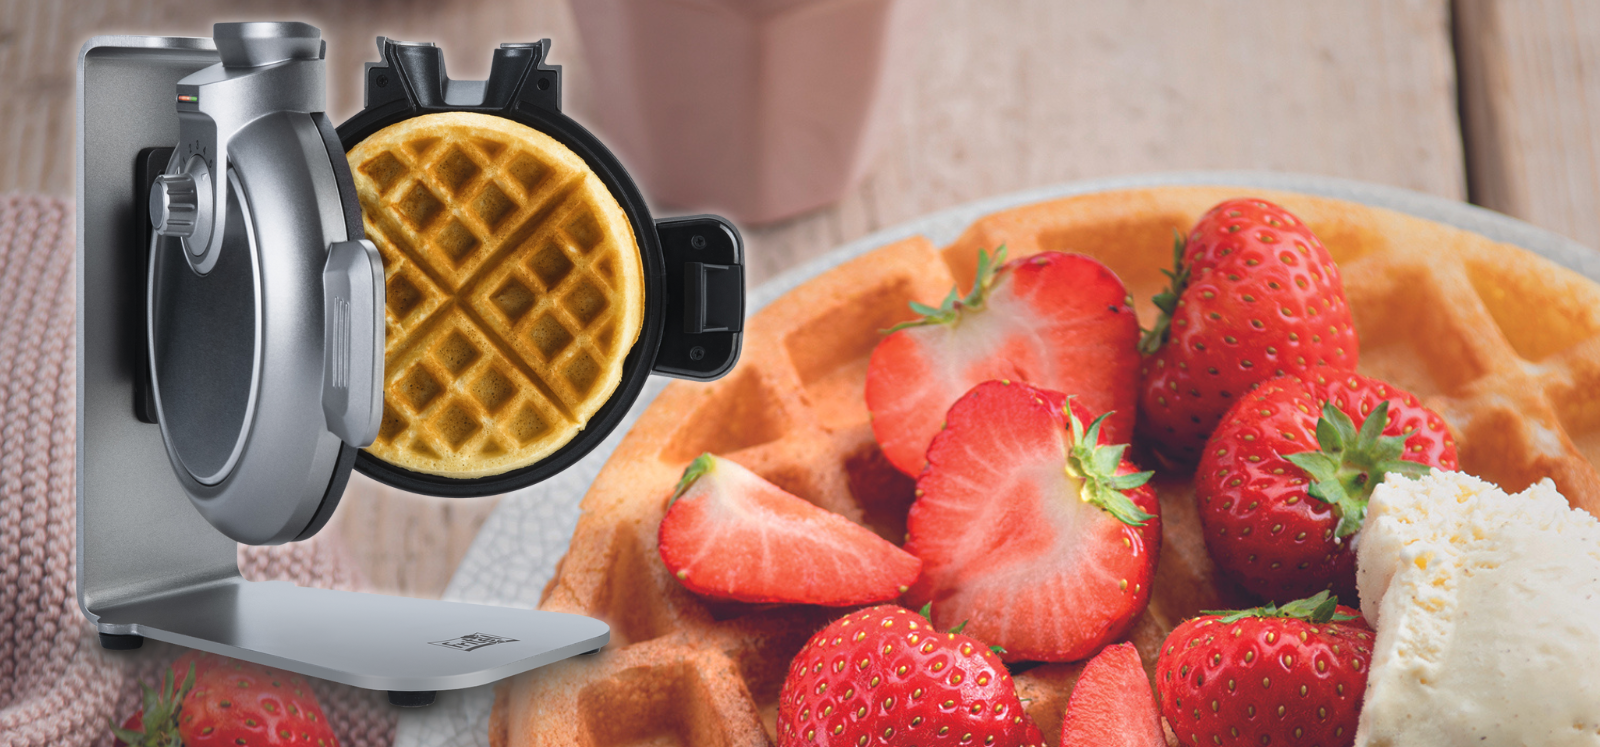 Pour and go with the FRITEL Top Fill Waffle Maker